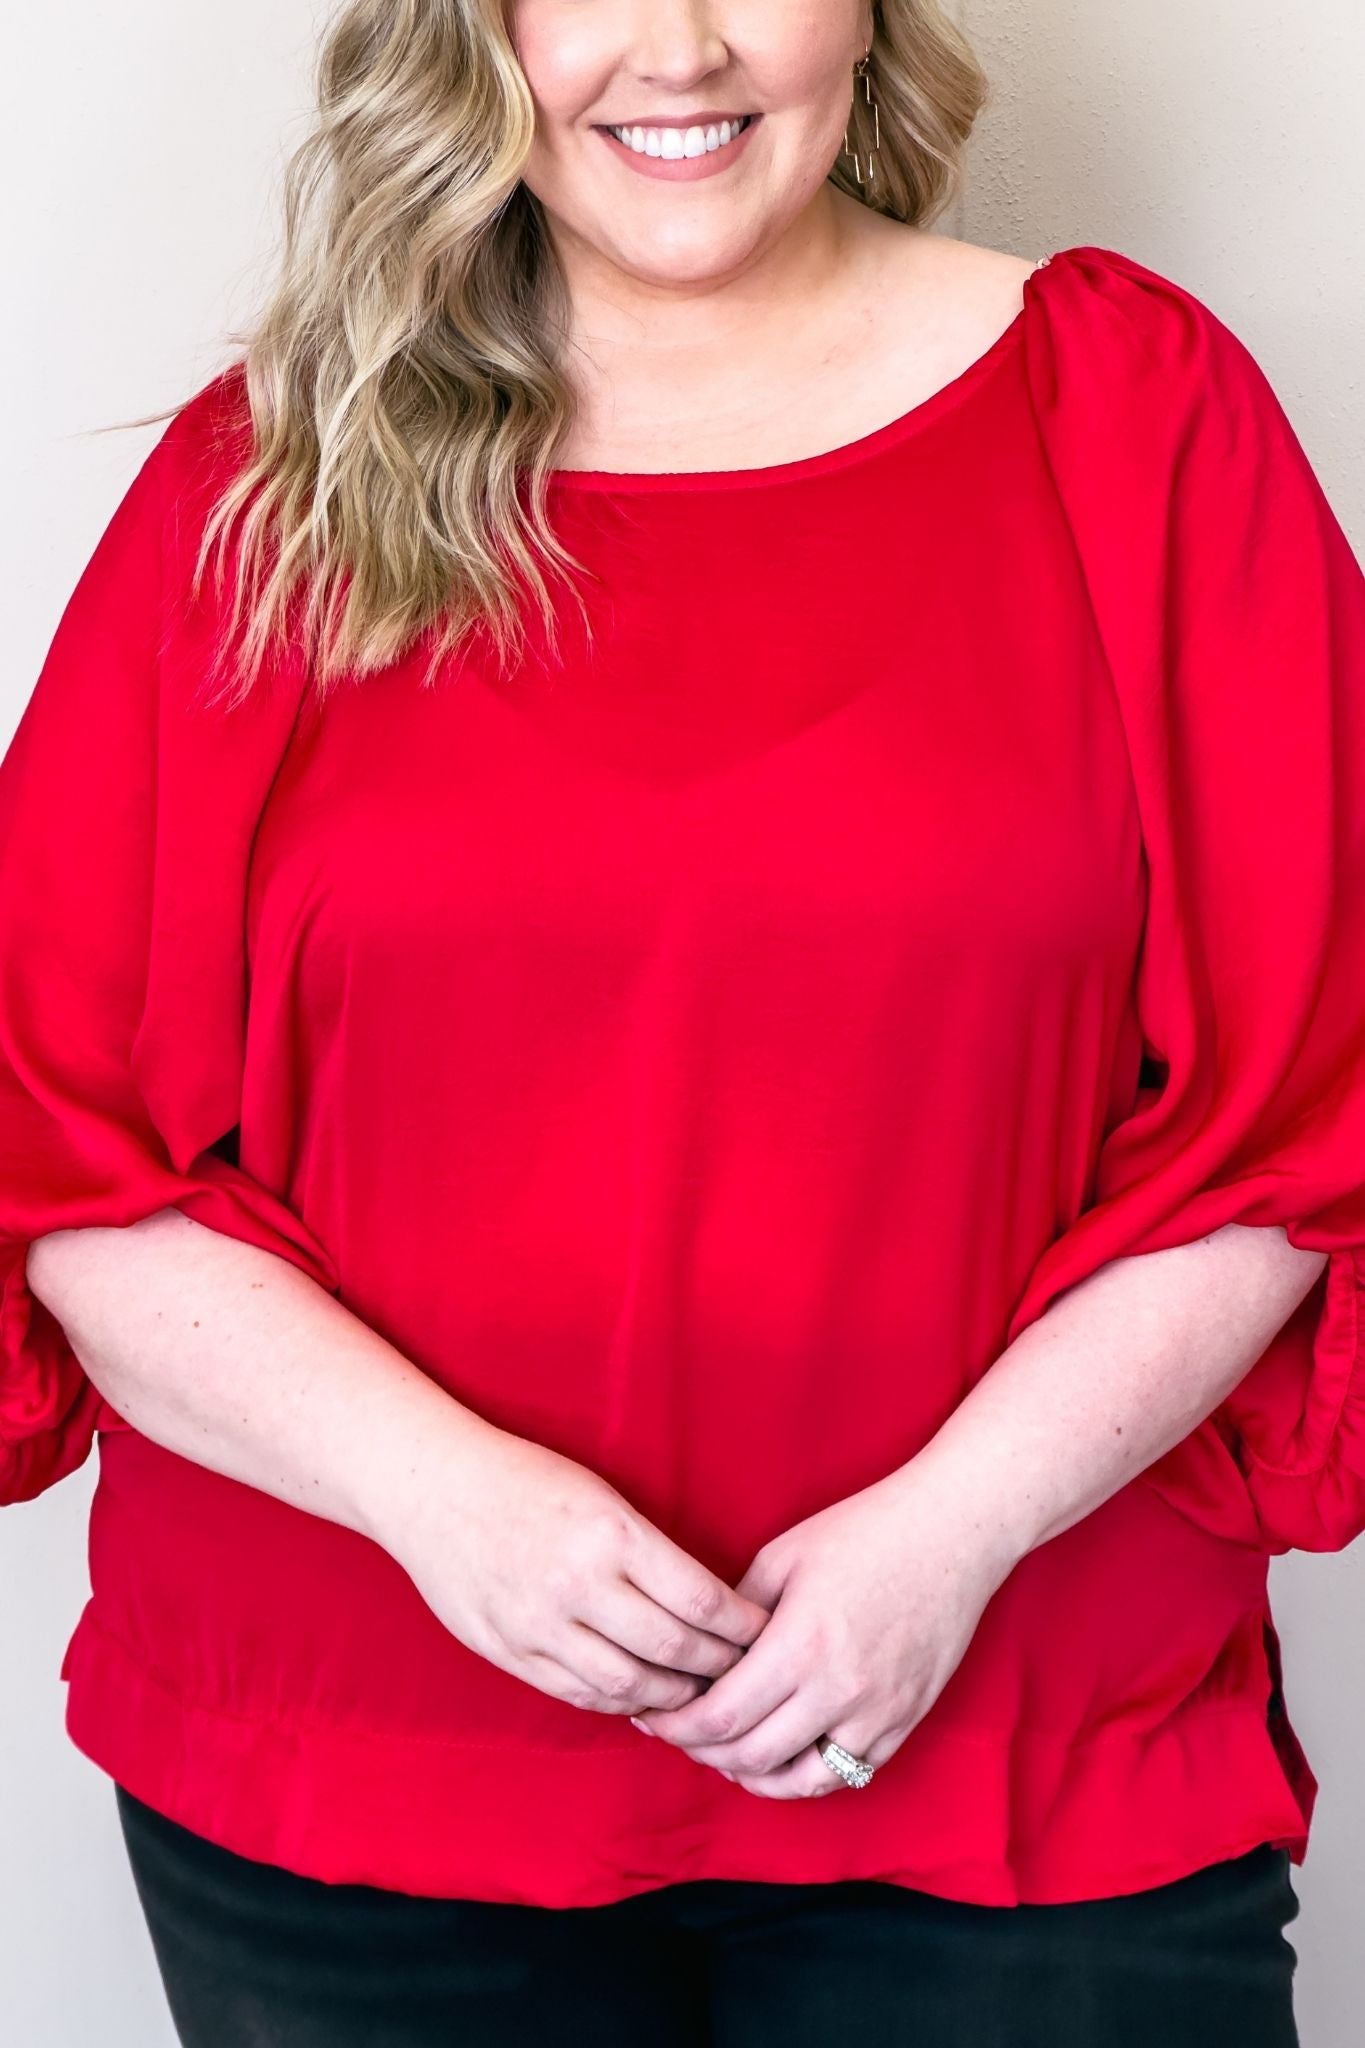 A soft, lightweight fabric red top that's perfect for a comfortable and stylish look.